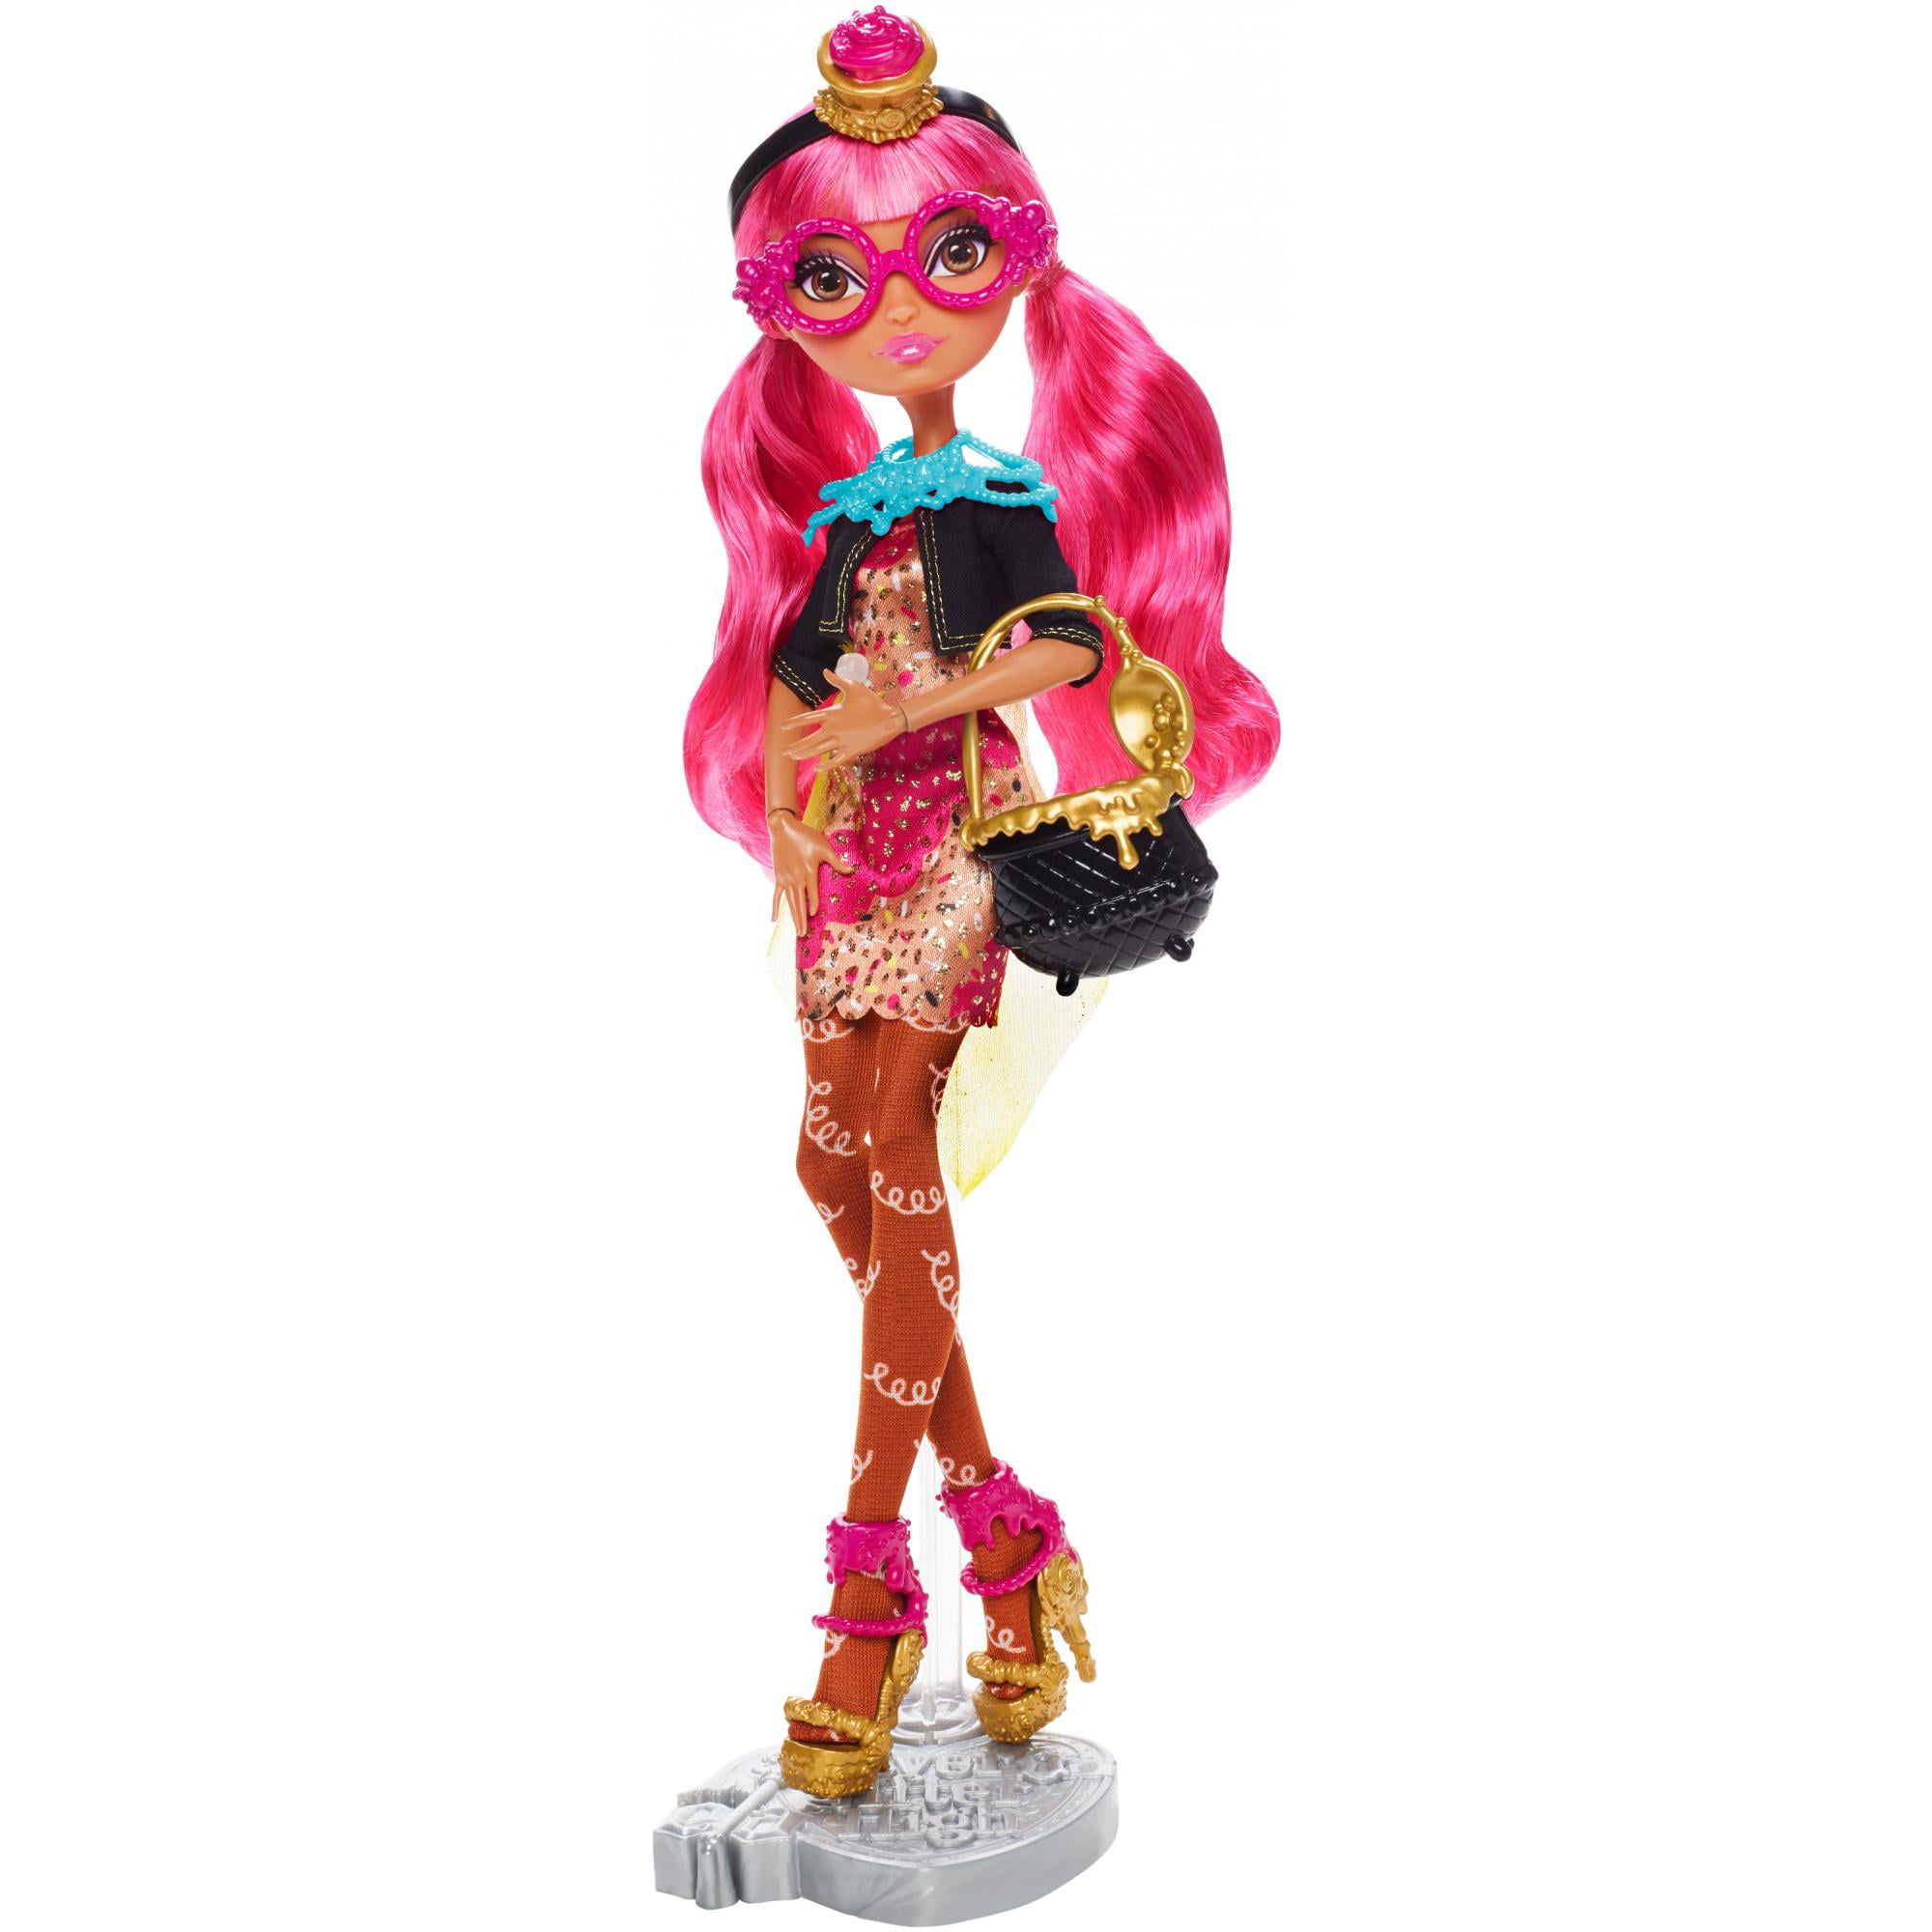  Mattel Ever After High Ginger Breadhouse Doll : Toys & Games